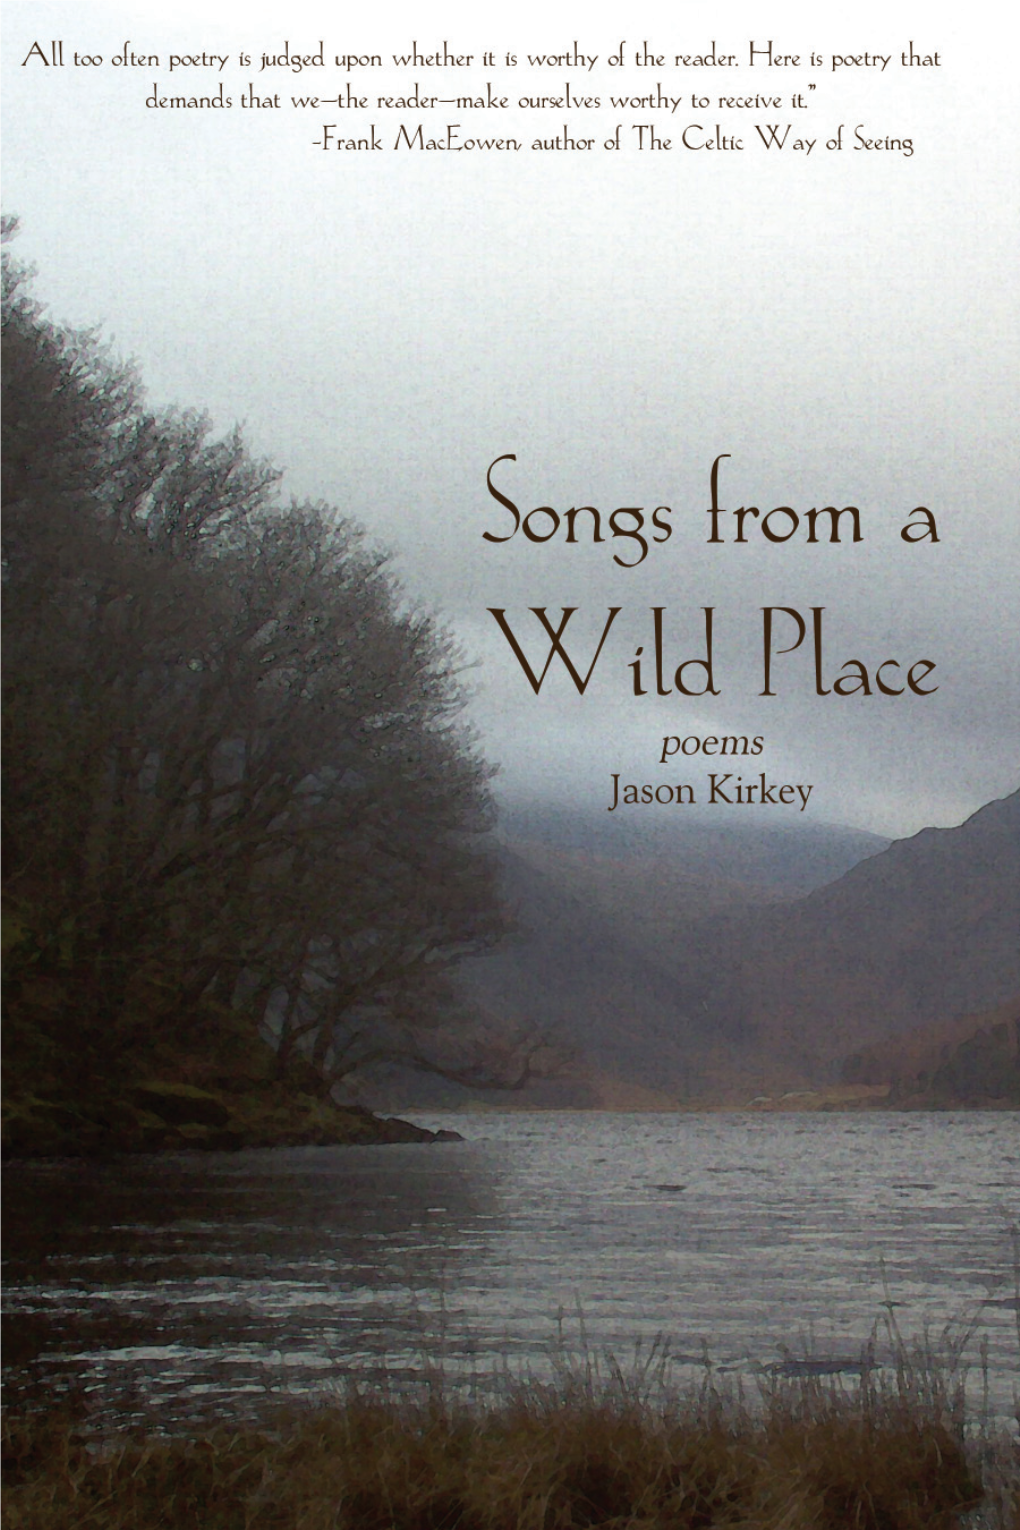 Songs from a Wild Place